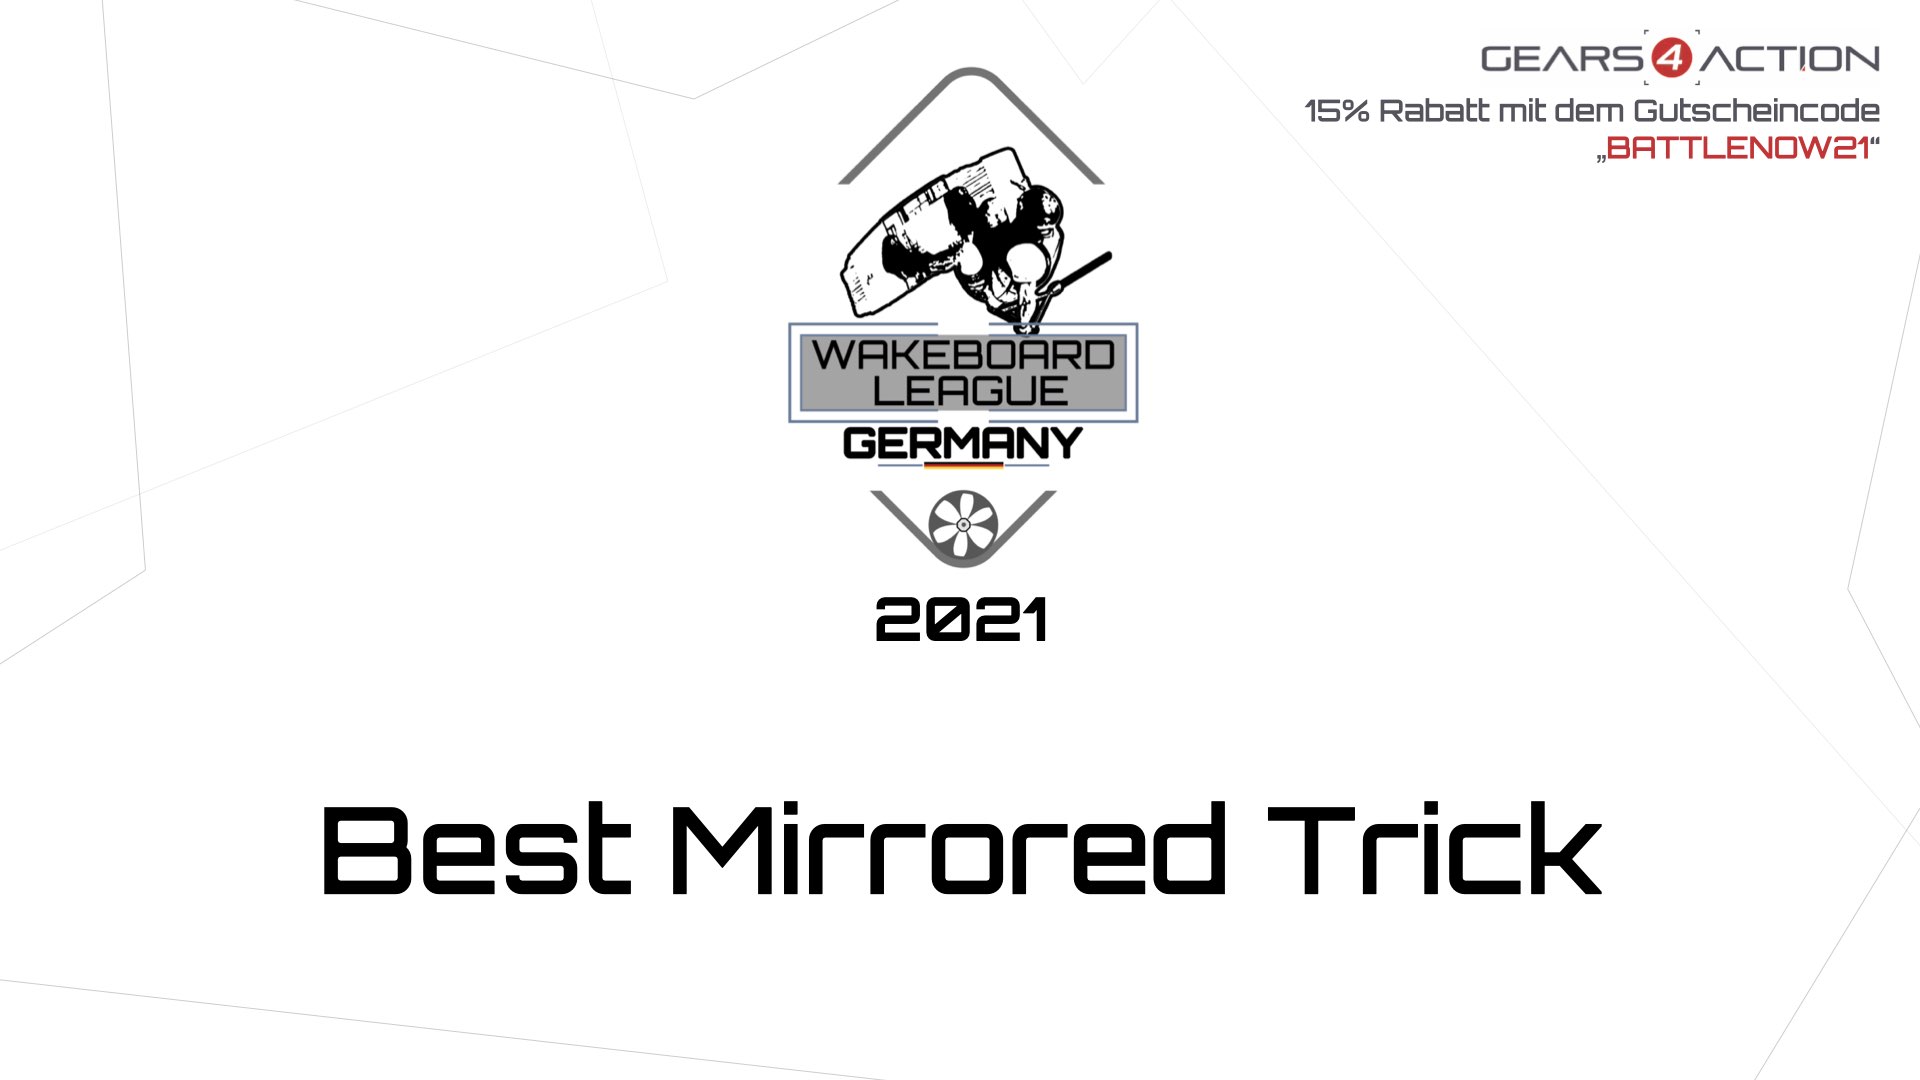 Wakeboard League Germany 2021 - #8 Best Mirrored Trick